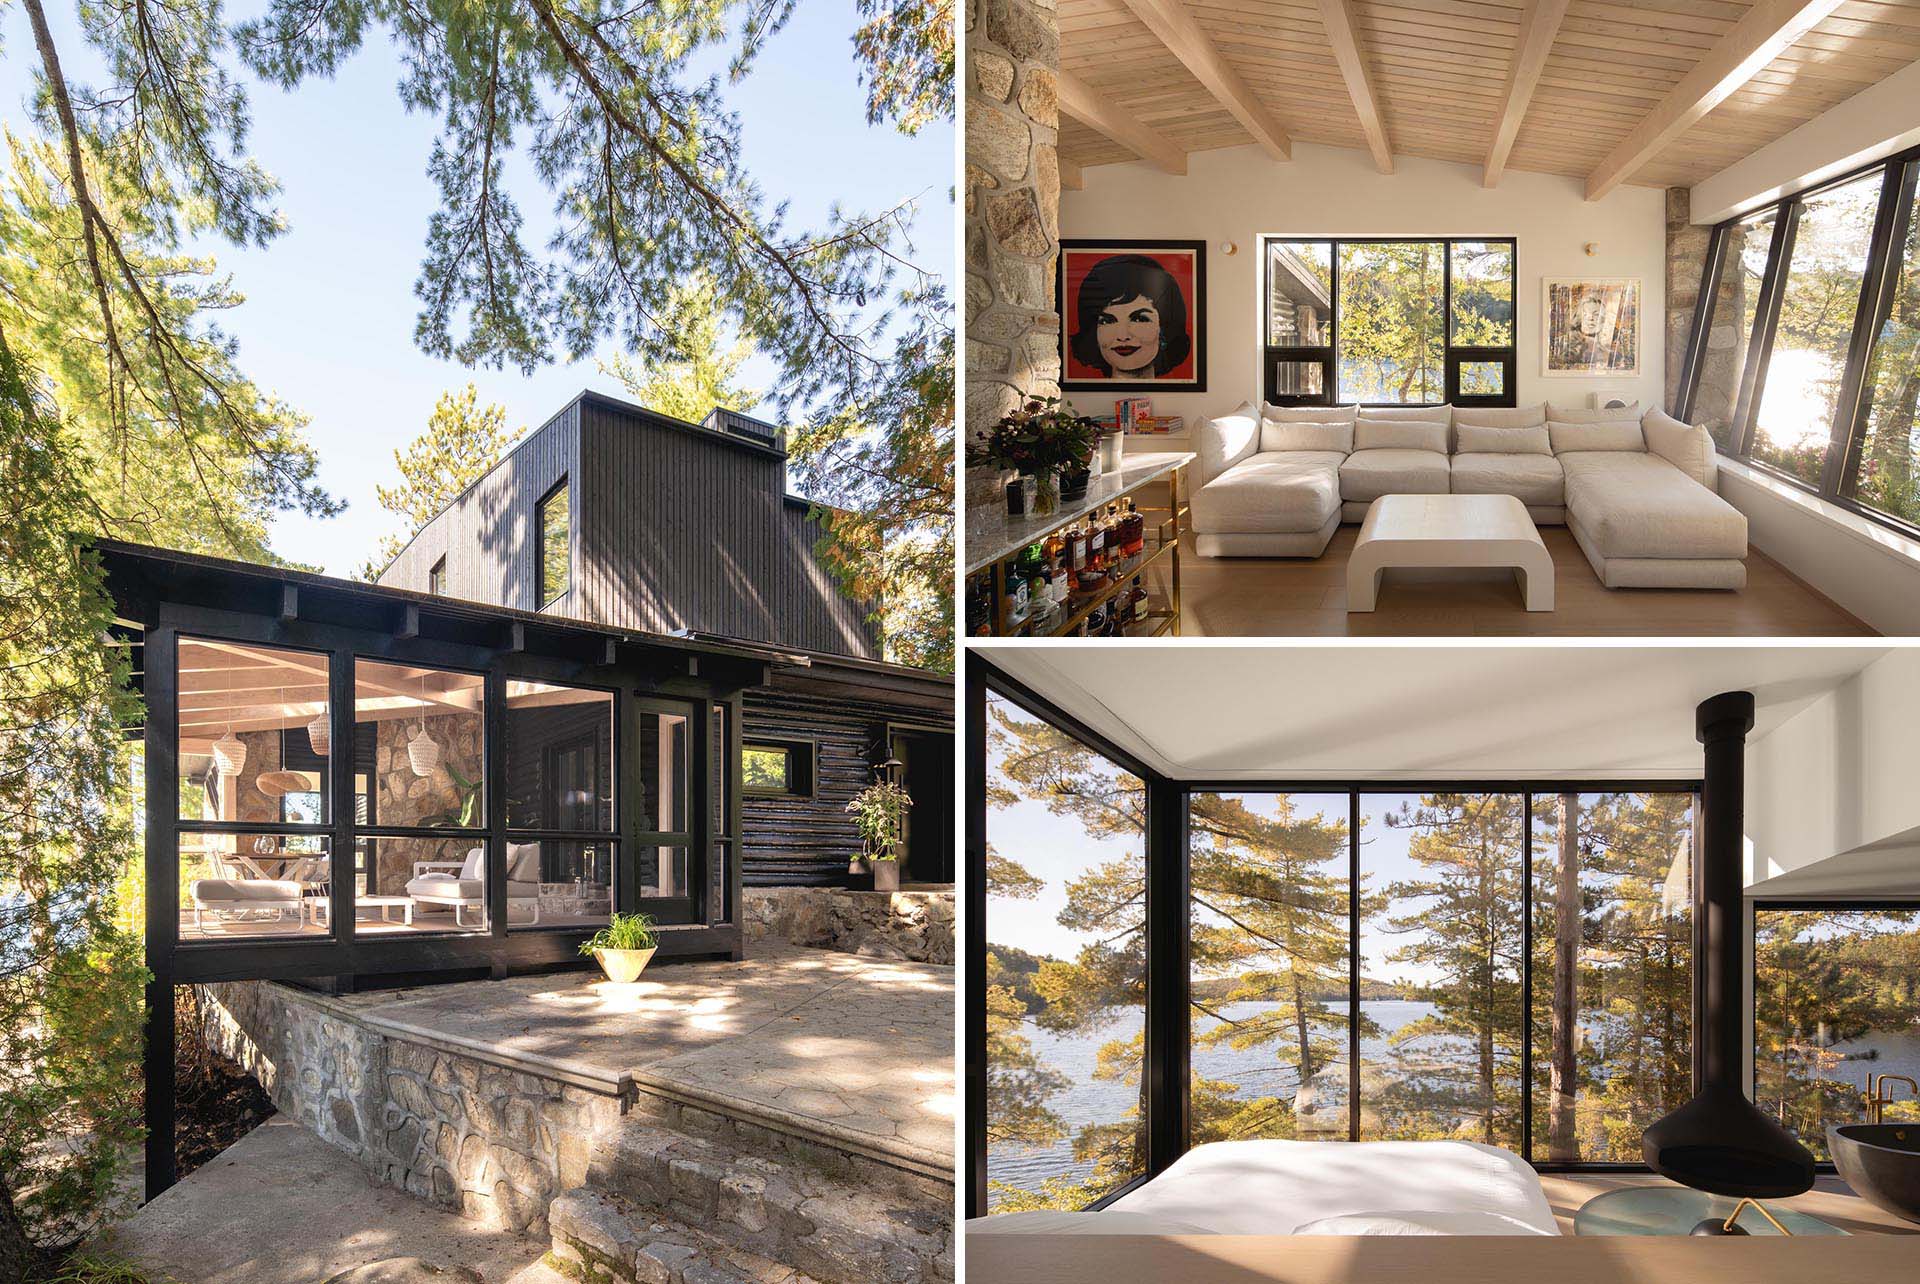 A remodel of an old log cabin includes a new black exterior and modern interior.